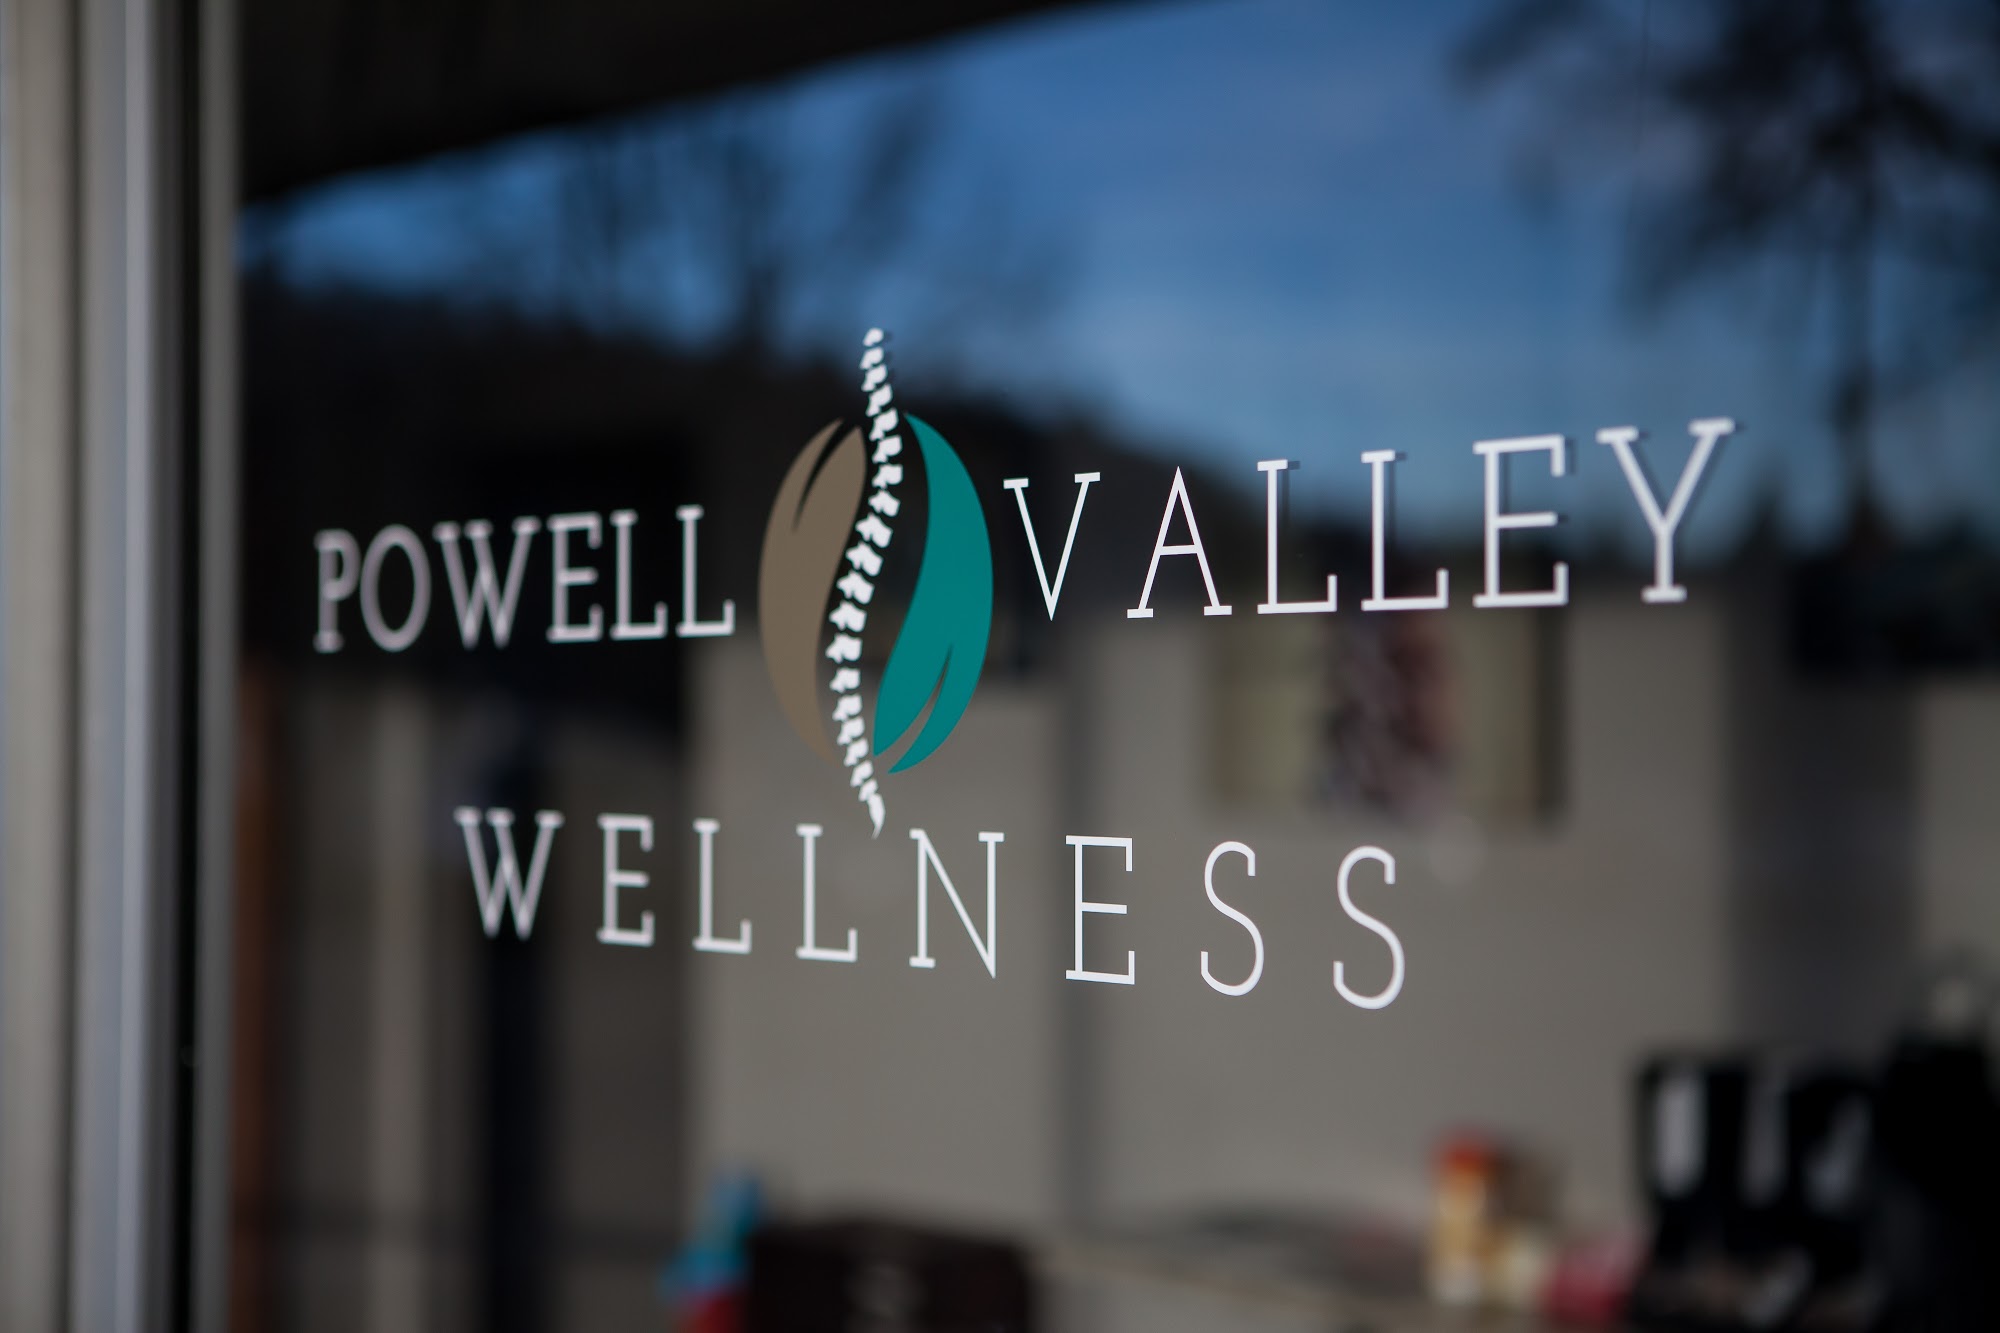 Powell Valley Wellness and Accident/Injury Care